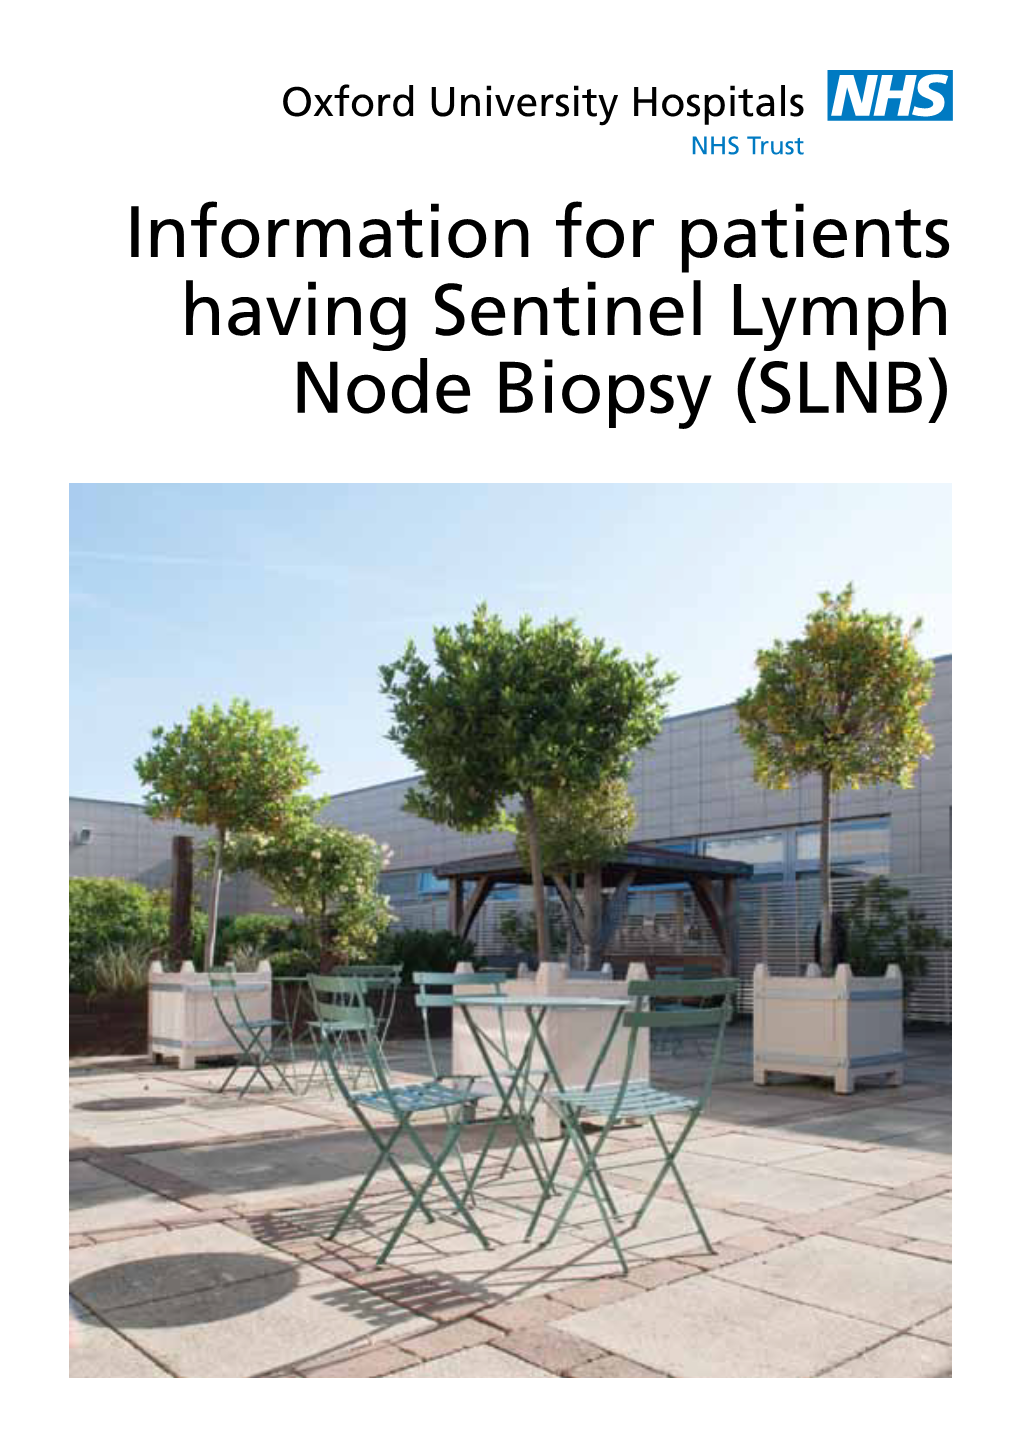 Information for Patients Having Sentinel Lymph Node Biopsy (SLNB) the Aim of This Booklet Is to Give You Some General Information About Your Surgery